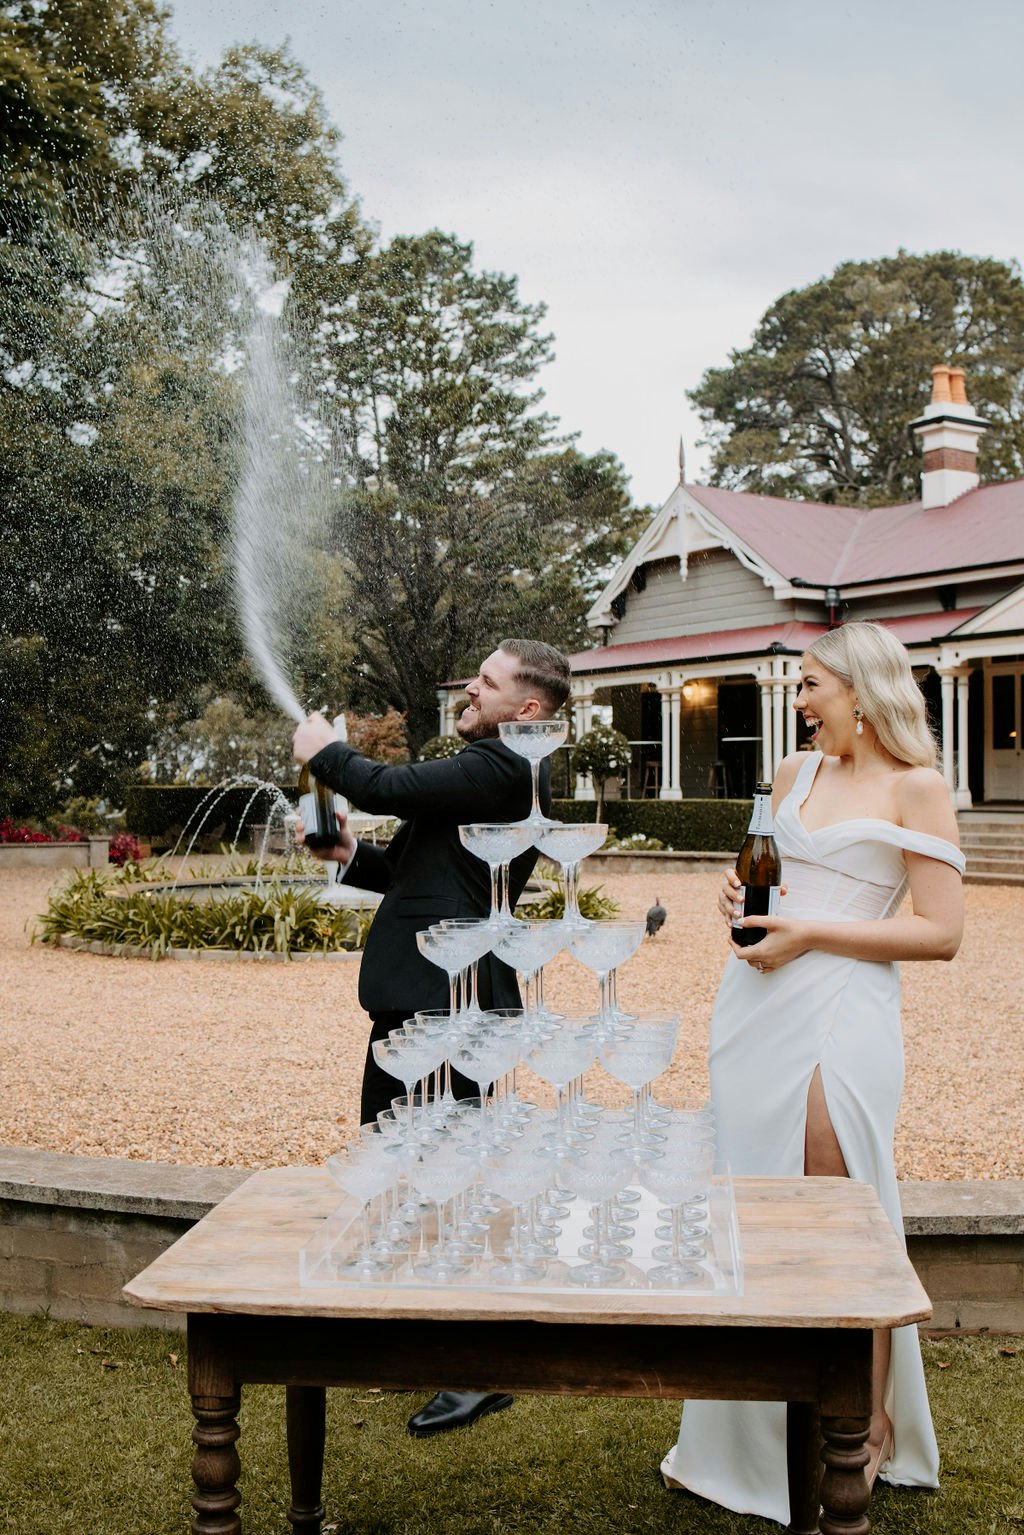 Bride and groom spraying champagne